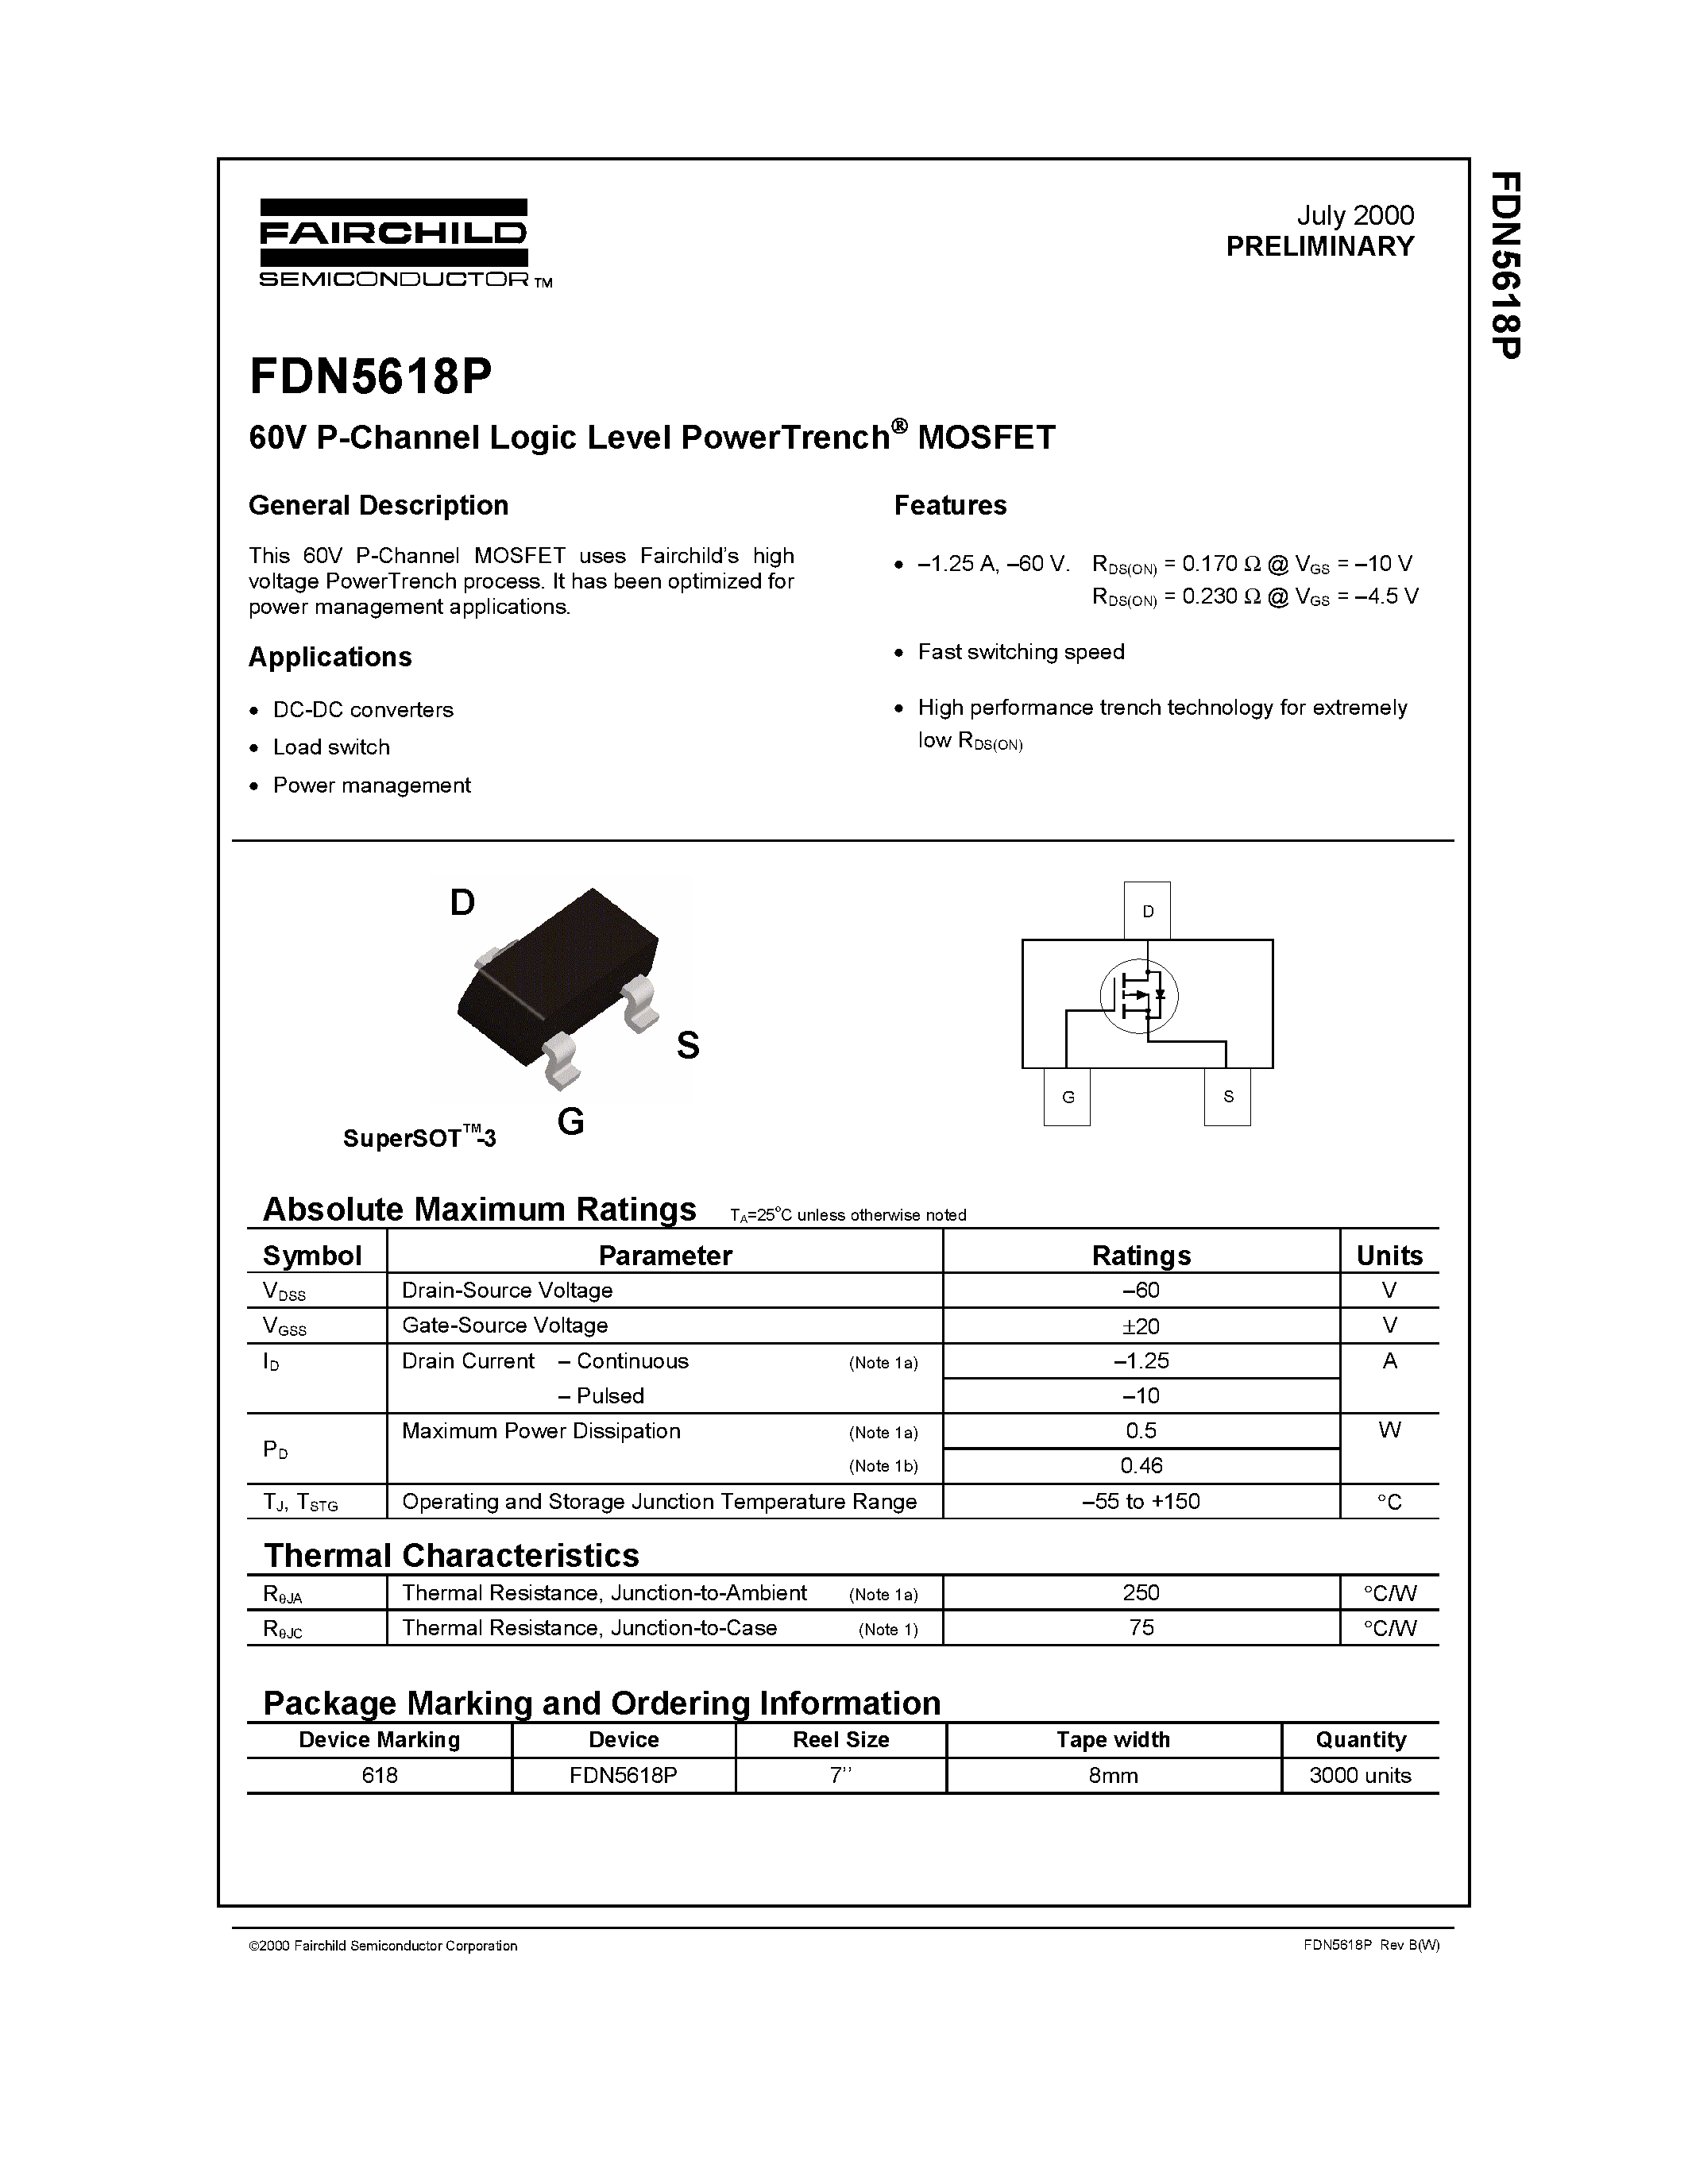 Даташит FDN5618-60V P-Channel Logic Level PowerTrench MOSFET страница 1